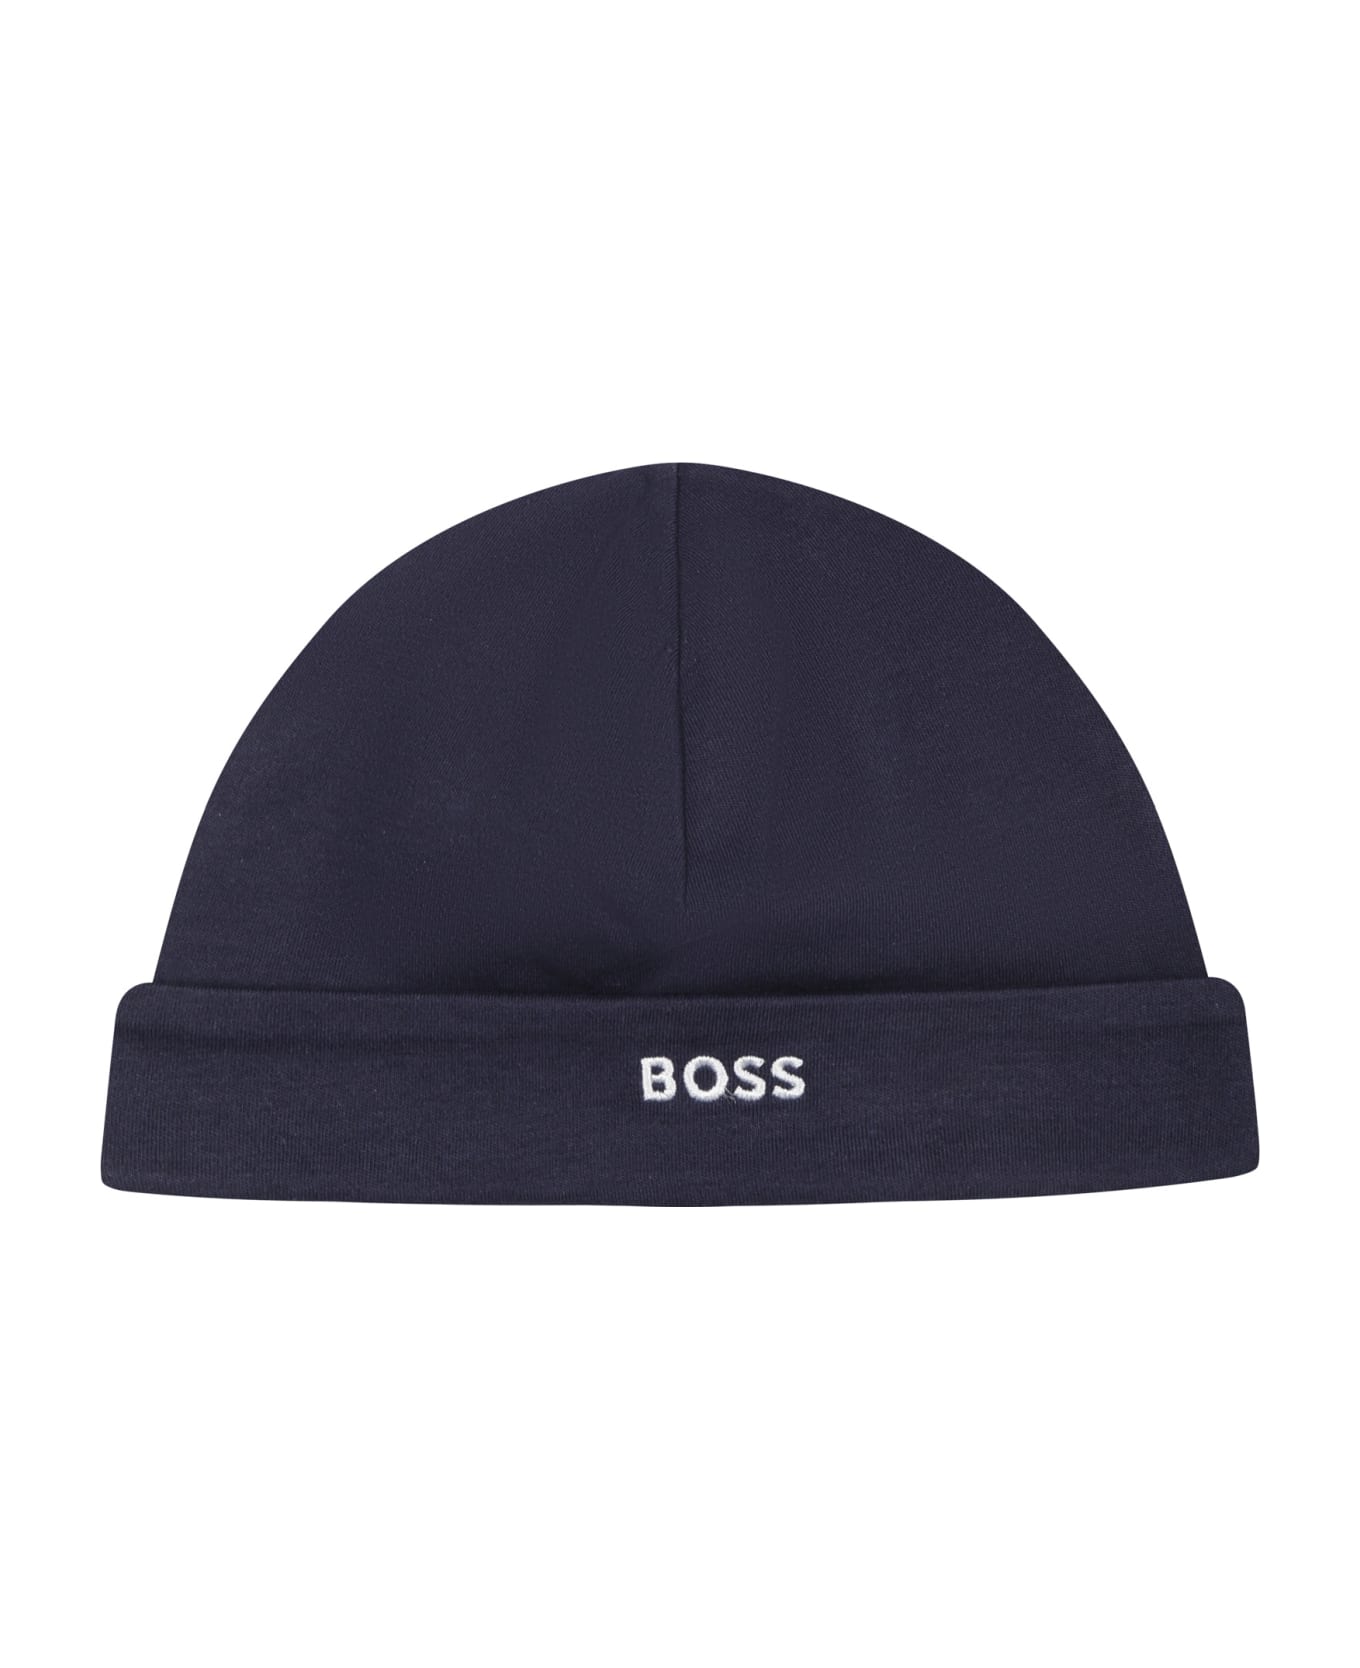 Hugo Boss Blue Hat For Baby Boy With Logo - Blue アクセサリー＆ギフト